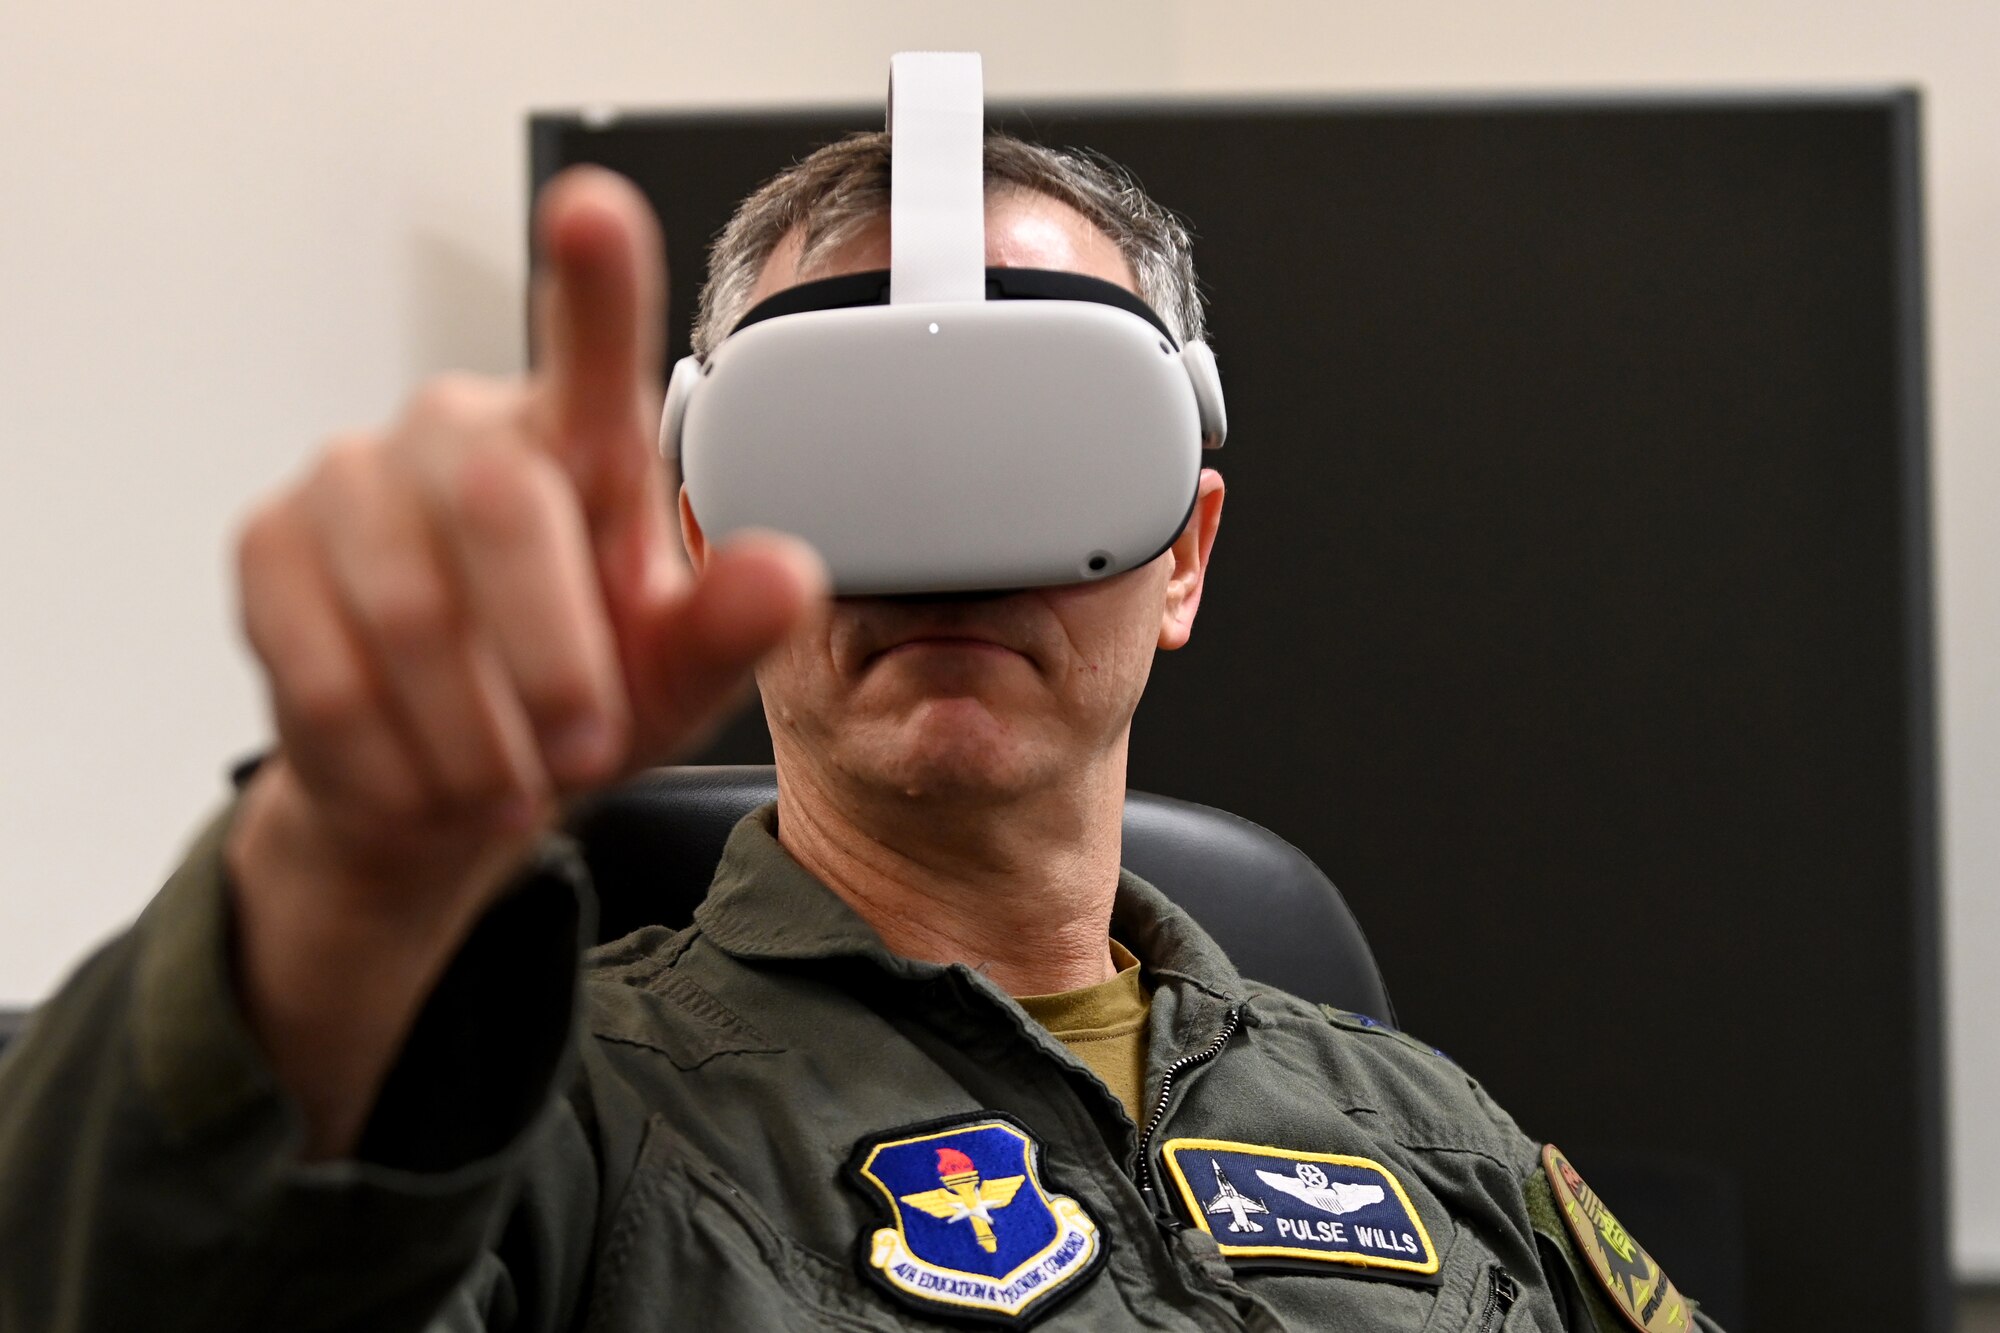 Maj. Gen. Craig D. Wills, 19th Air Force commander, views a virtual reality MQ-9 training program, July 20, 2021, on Holloman Air Force Base, N.M. The 16th Training Squadron uses MQ-9 Reaper simulators to train pilots and sensor operators for their field. (U.S. Air Force photo by Staff Sgt. Christopher S. Sparks)